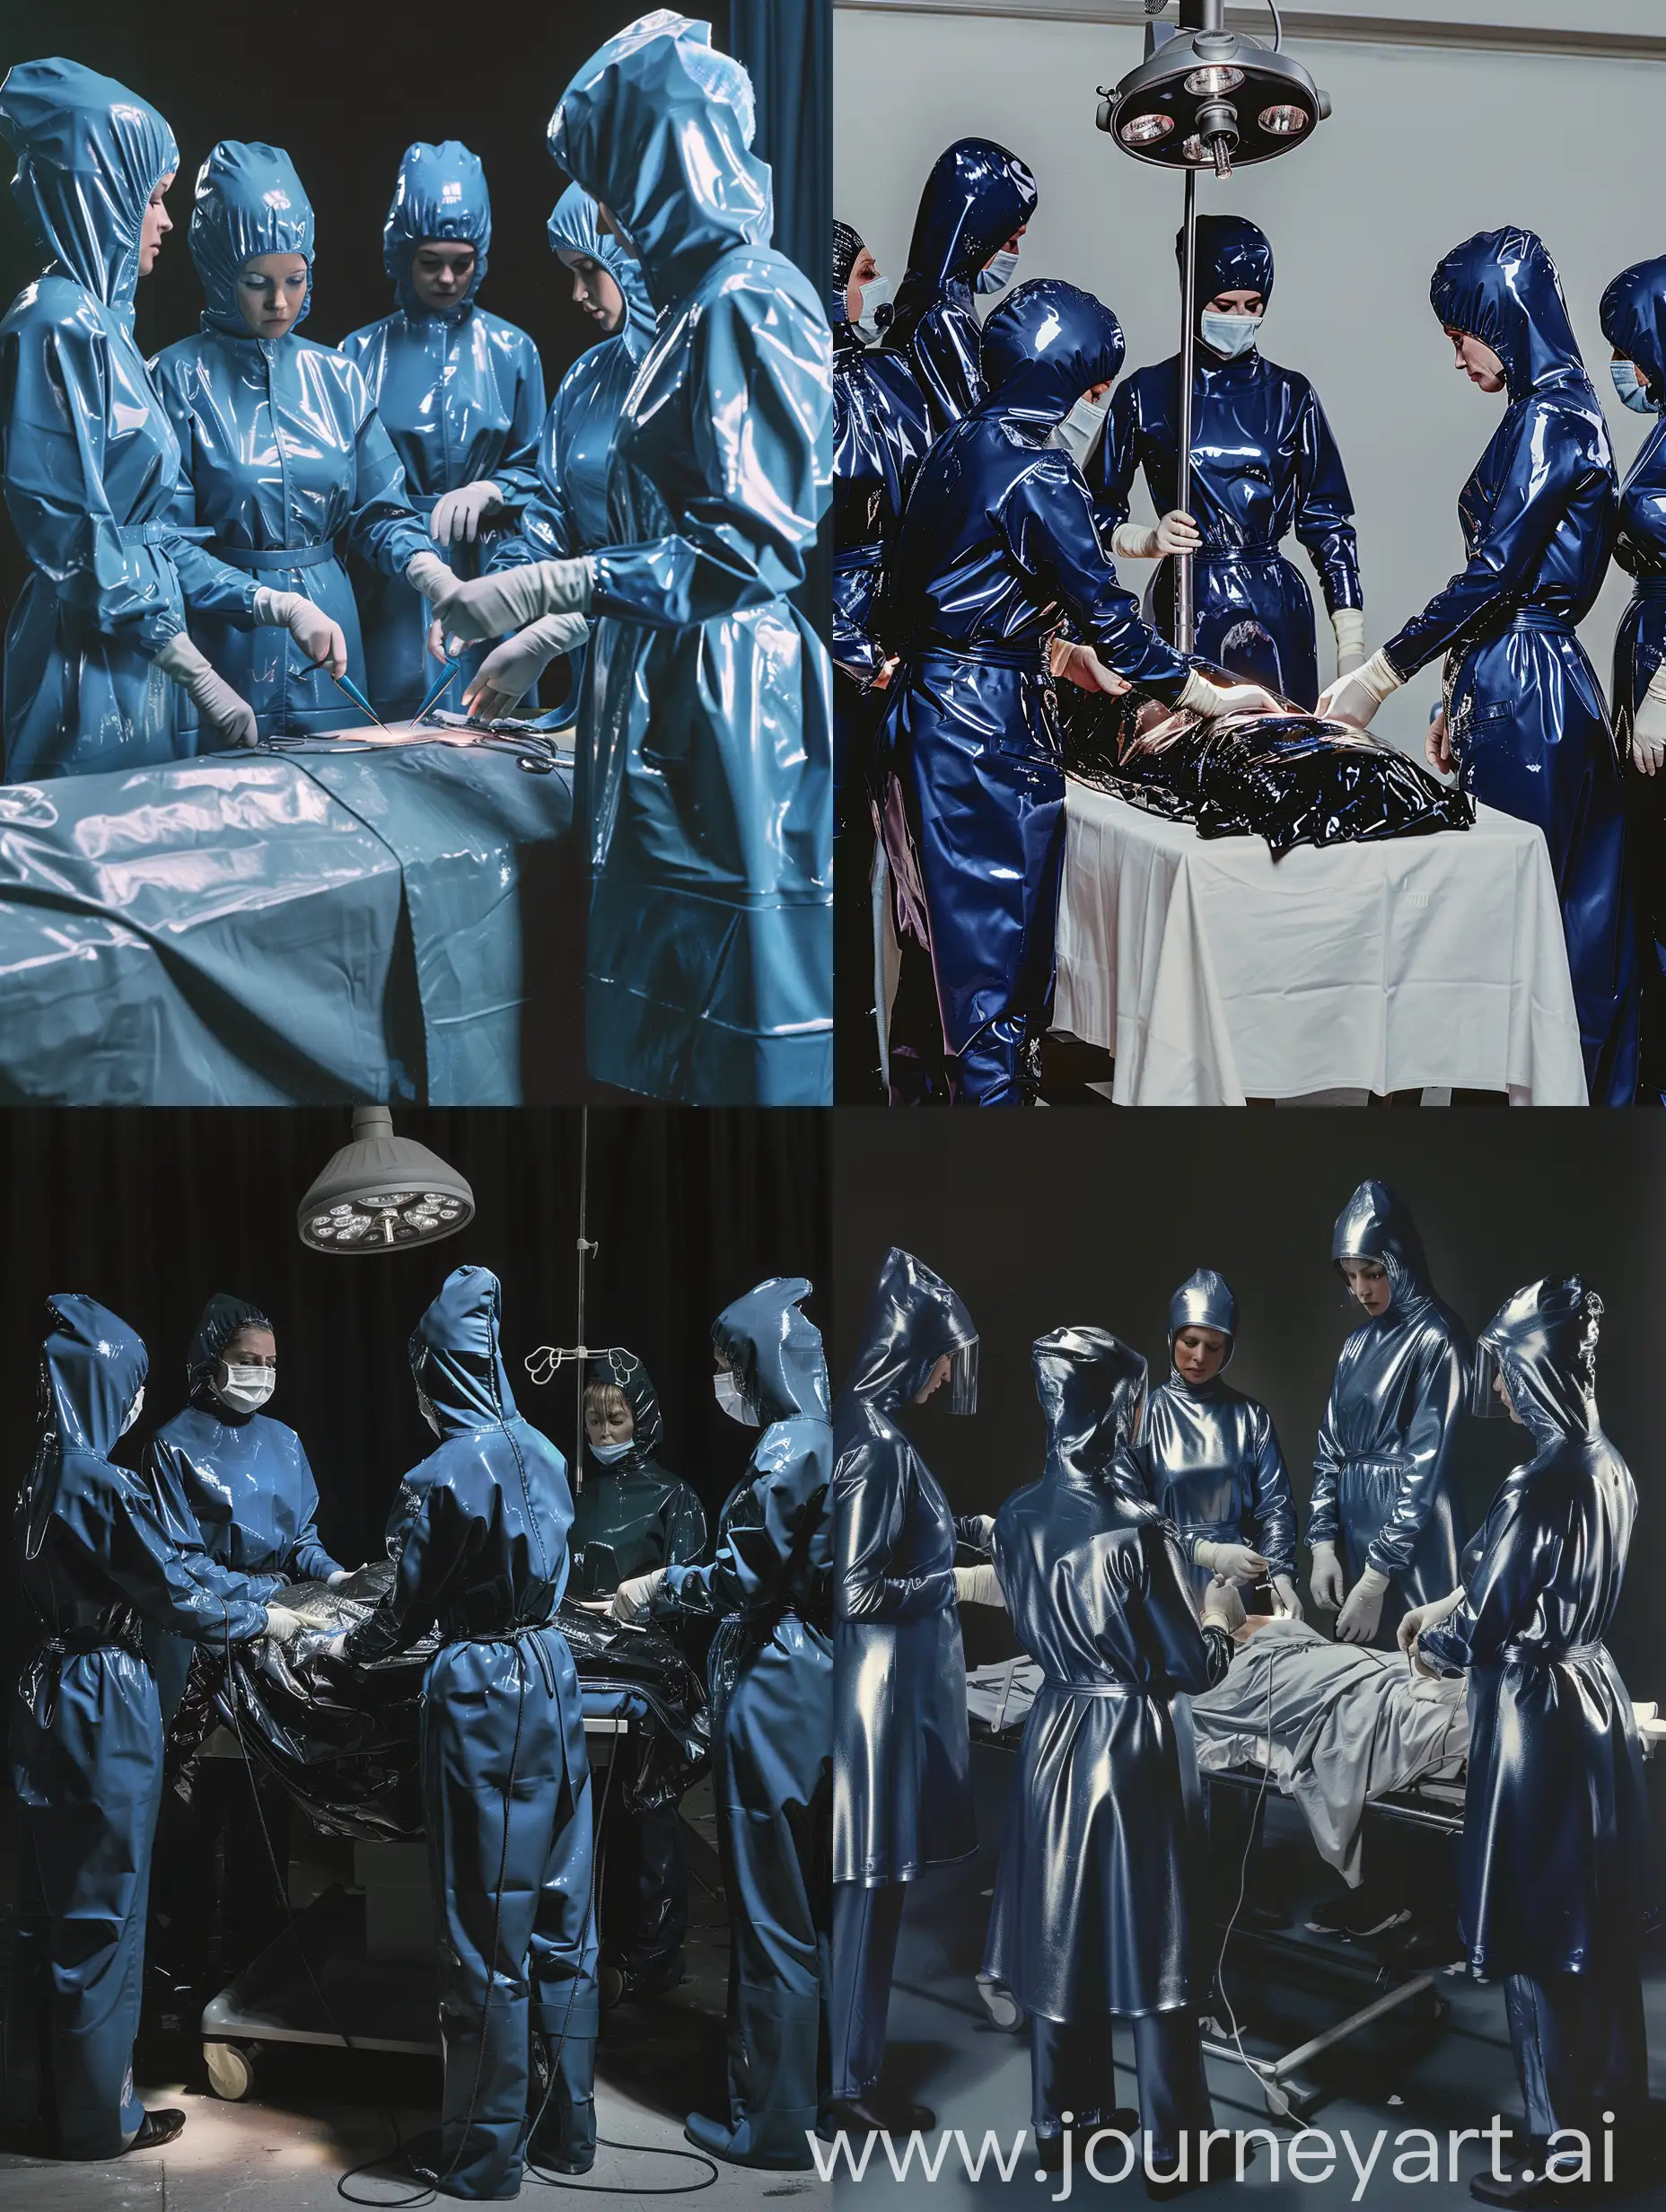 AllFemale-Surgical-Team-Performing-Operation-in-Blue-Latex-Mackintoshes